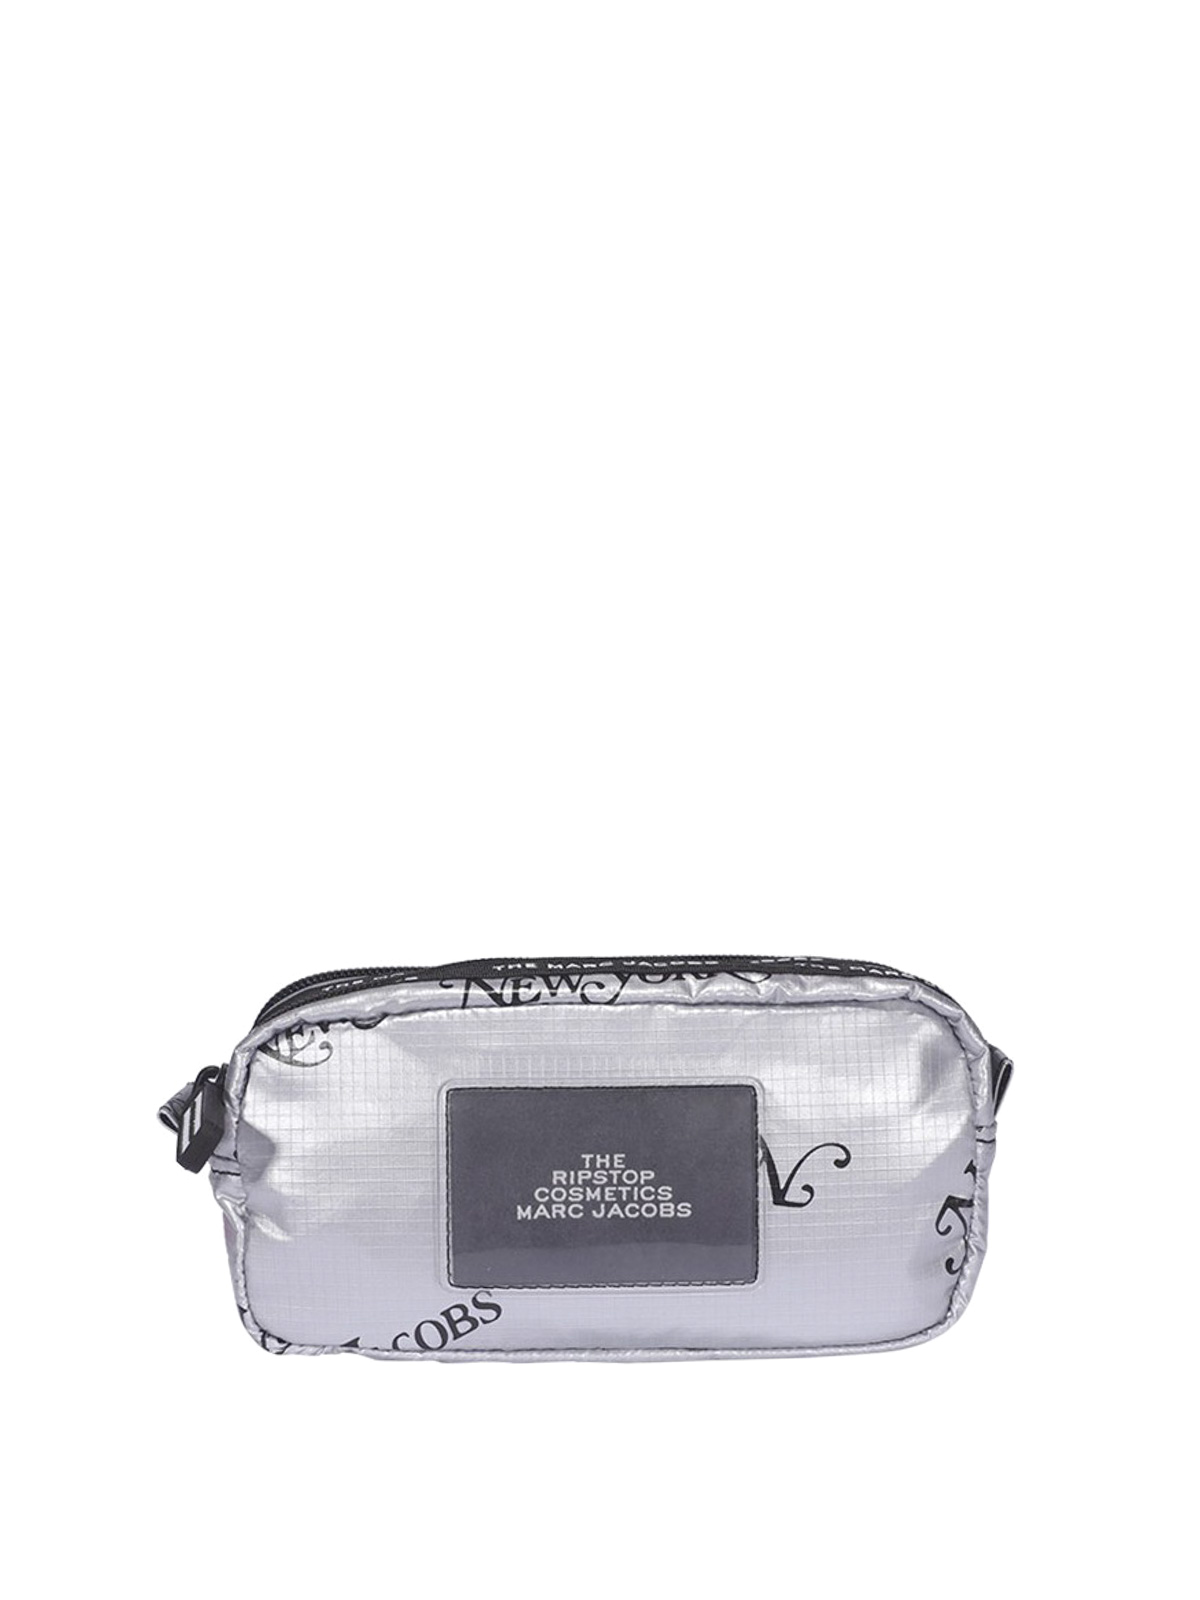 MARC JACOBS NEW YORK MAGAZINE® THE RIPSTOP COSMETIC BAG